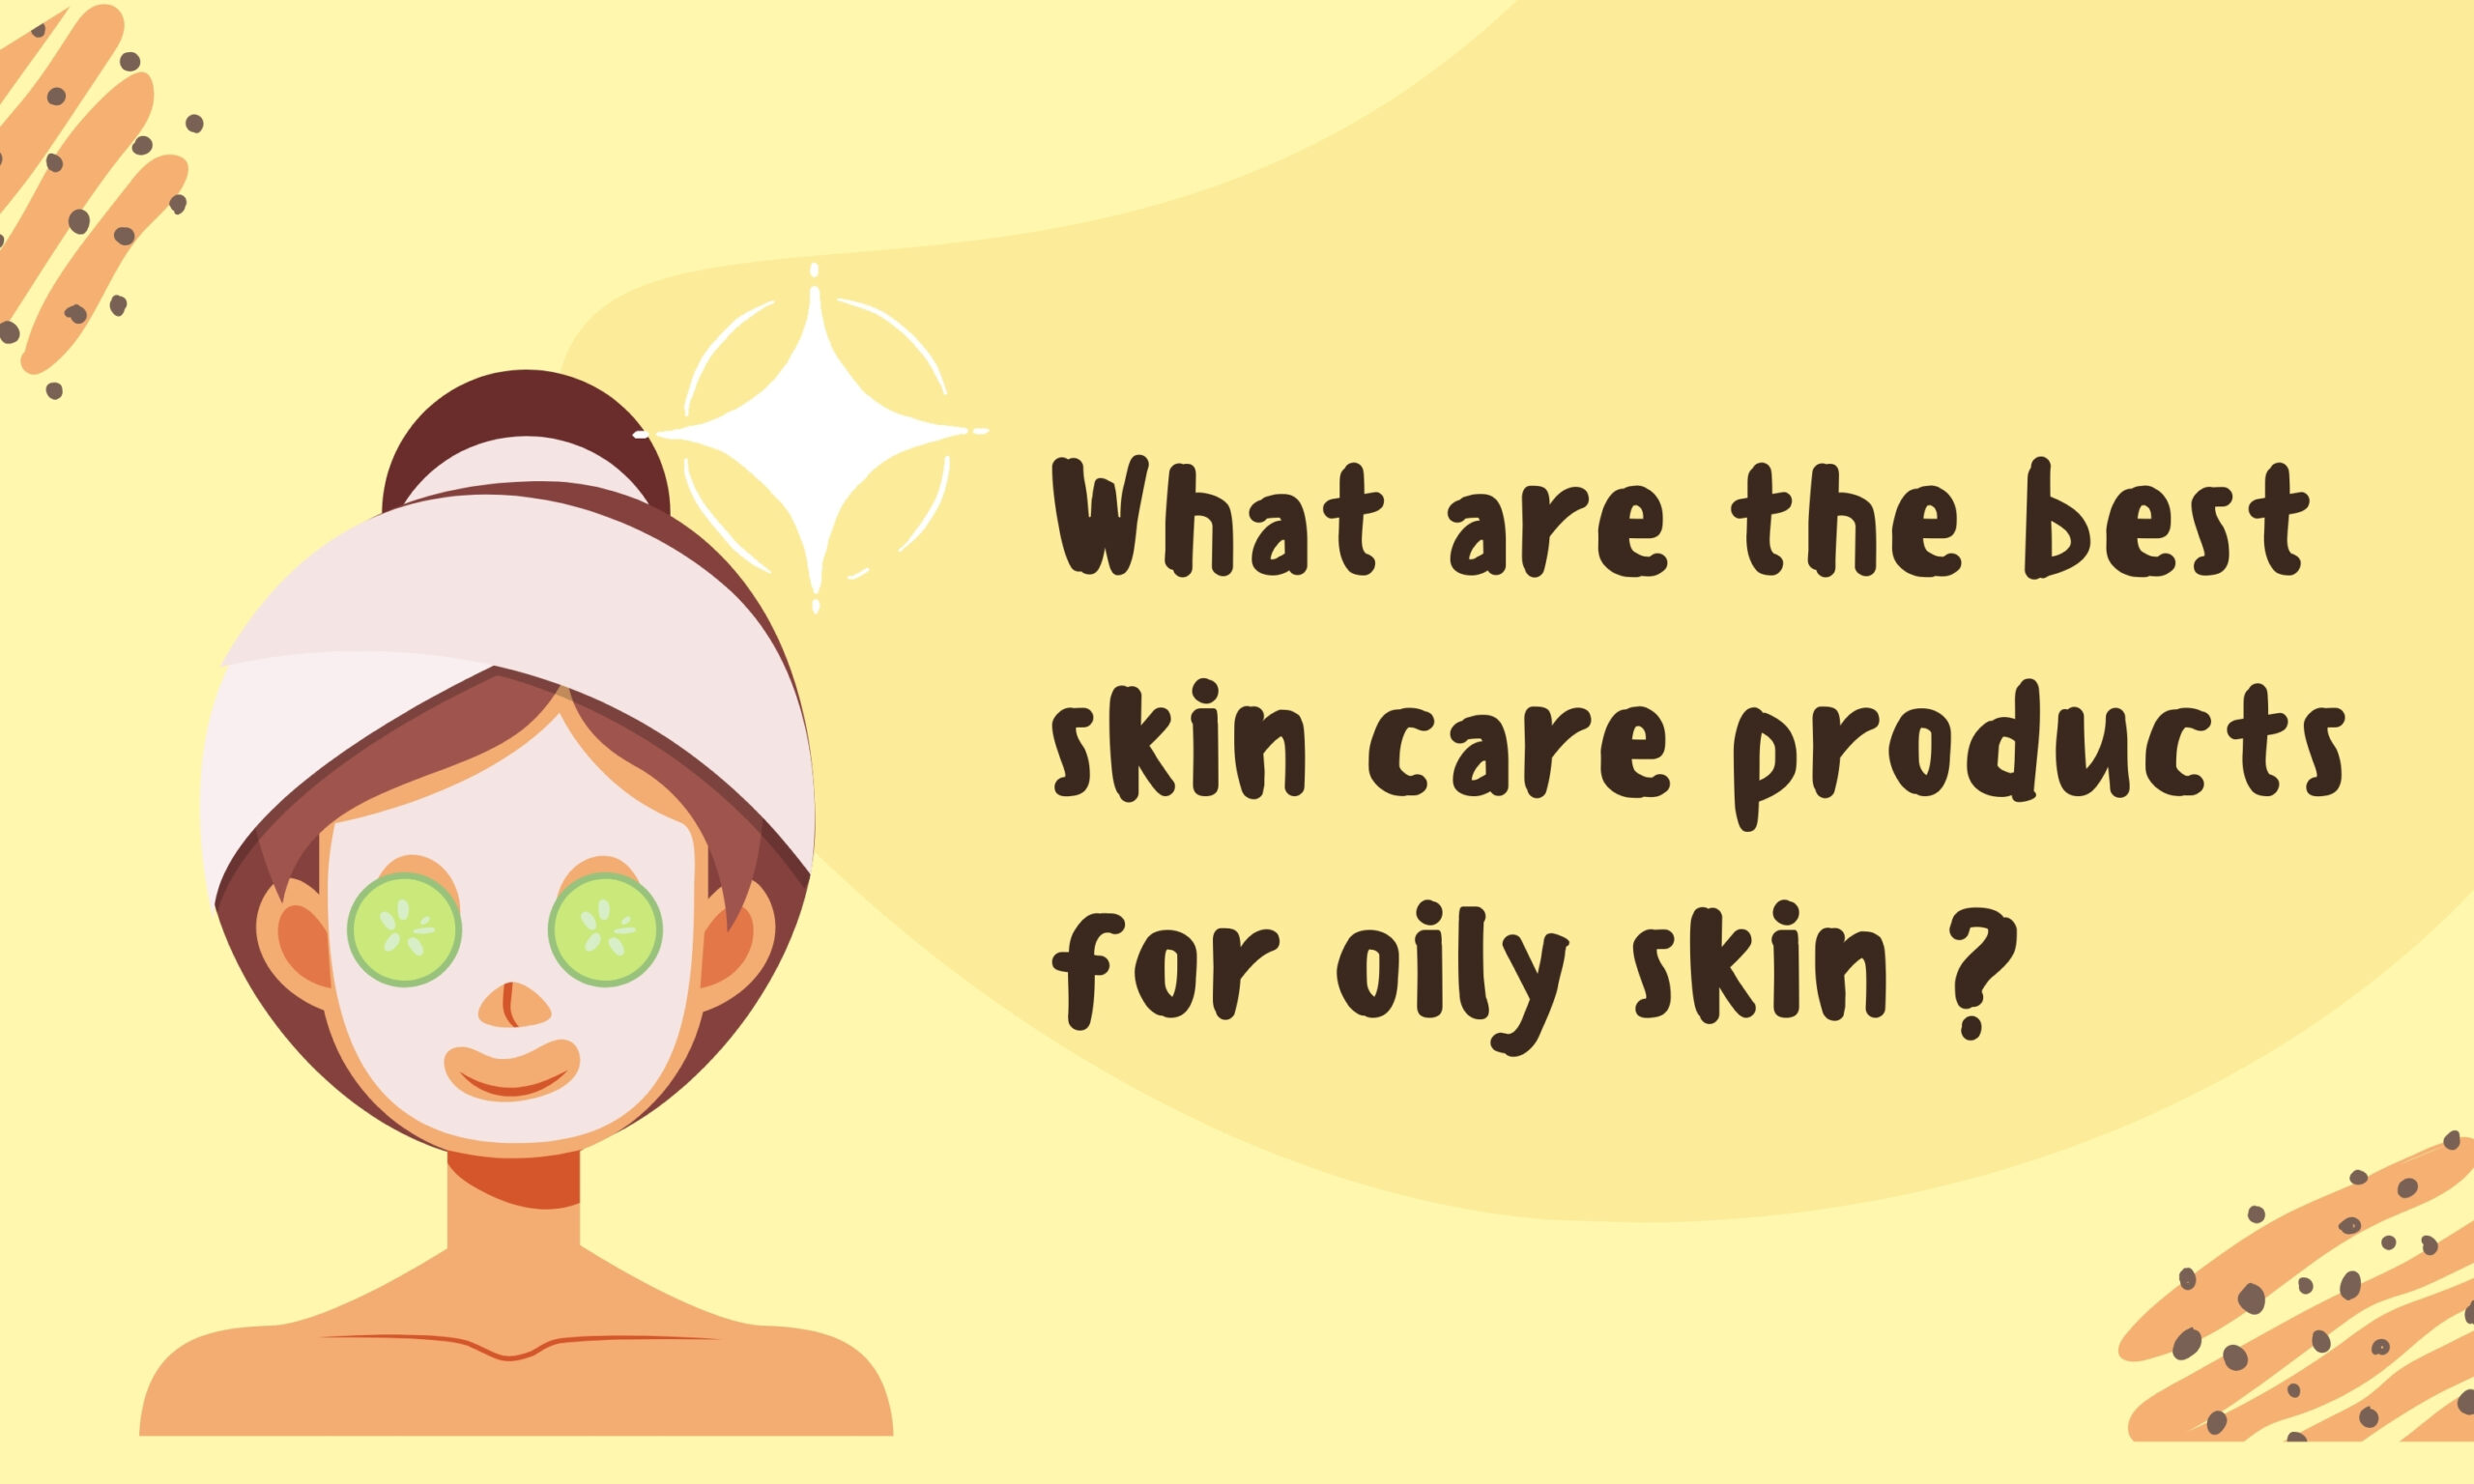 What are the best skin care products for oily skin